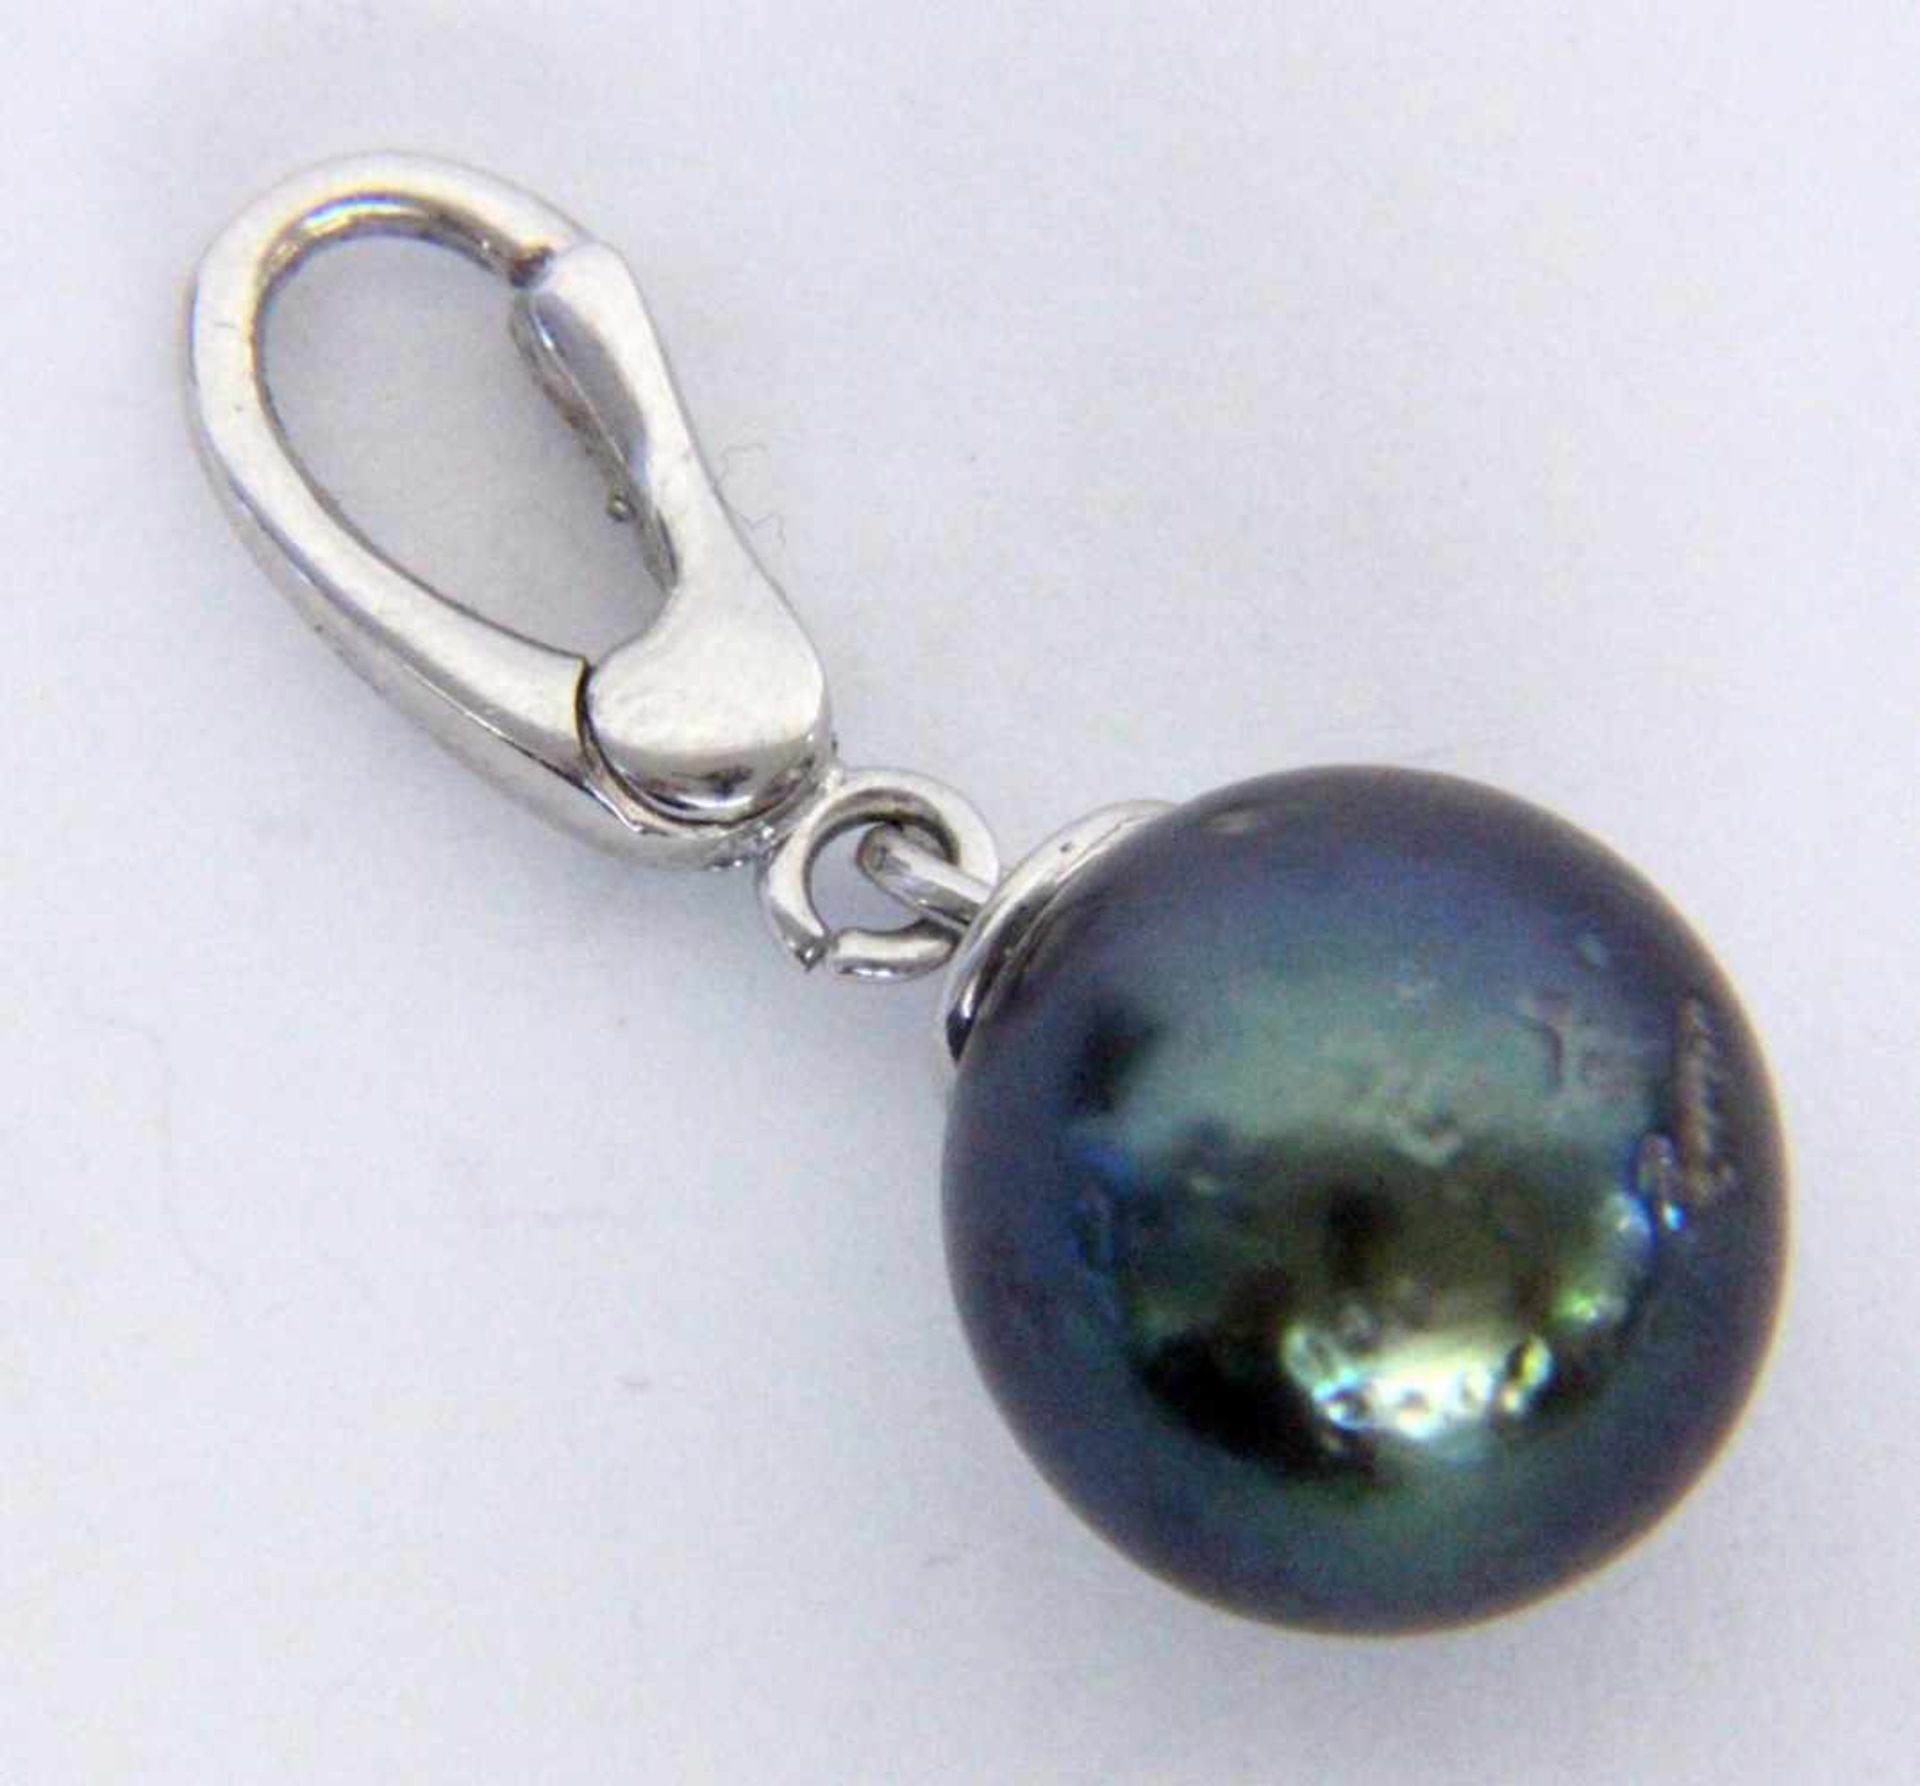 ''A PENDANT 585/000 white gold with Tahitian pearl measuring approximately 12 mm. 30 mm